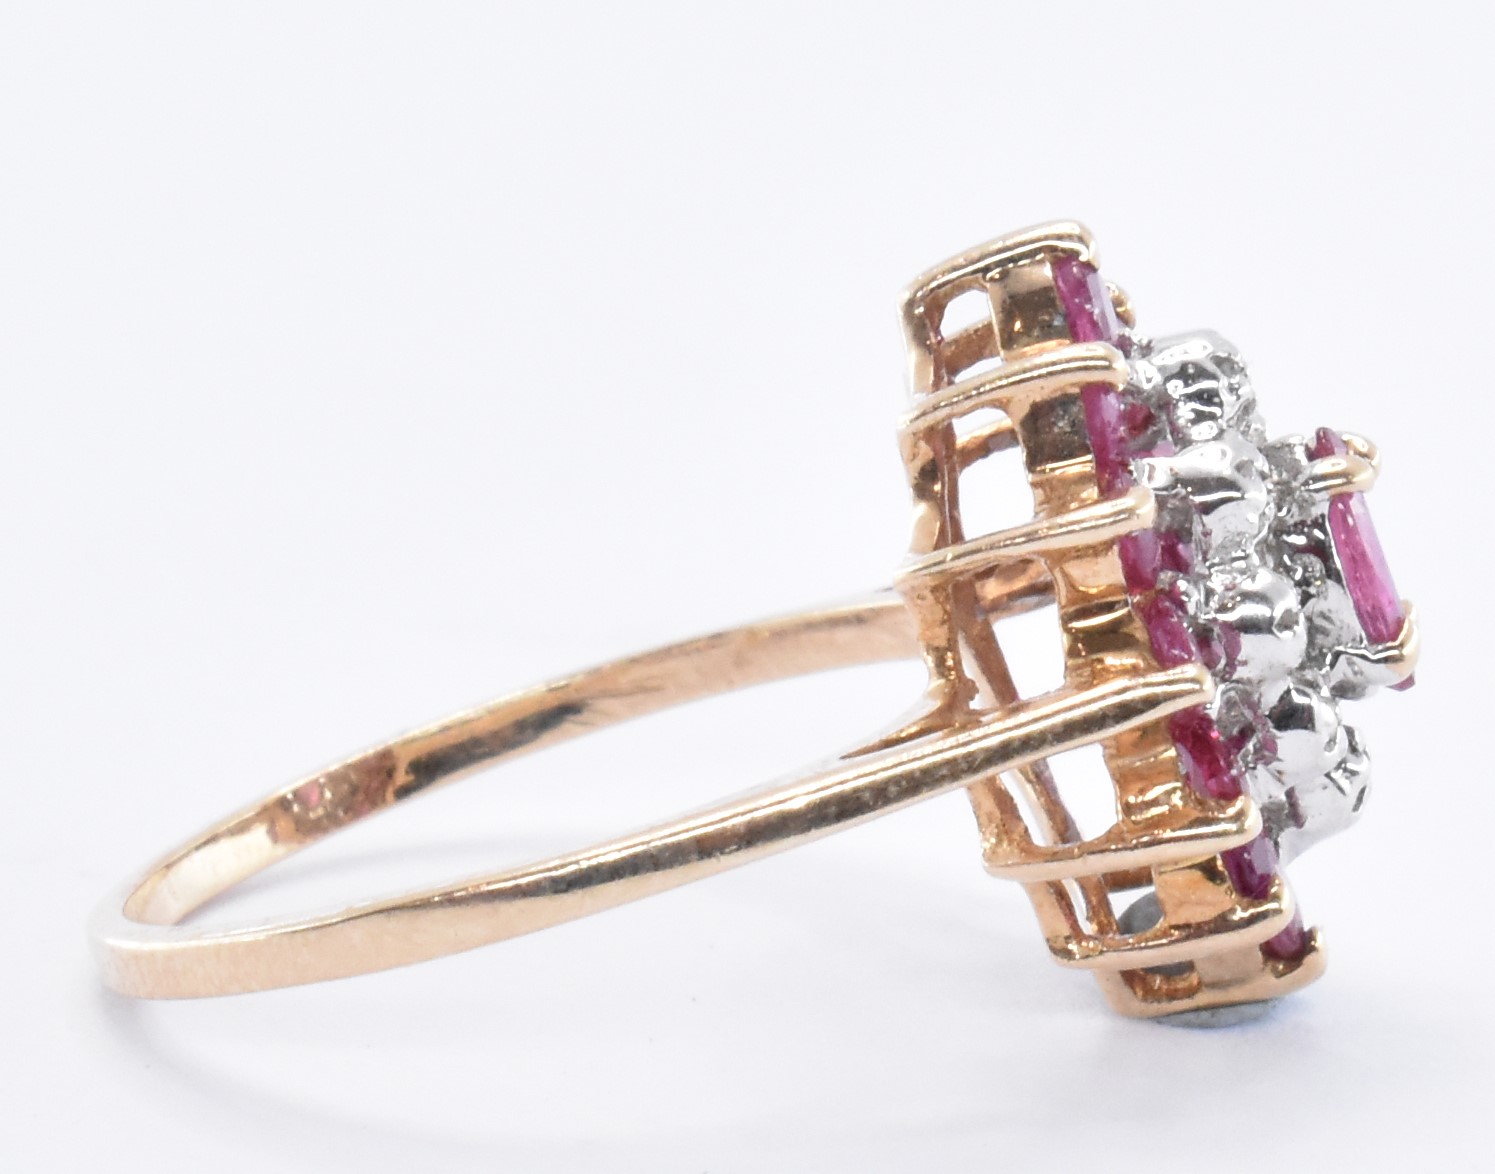 9CT GOLD CLUSTER RING WITH RUBIES AND DIAMONDS - Image 6 of 7